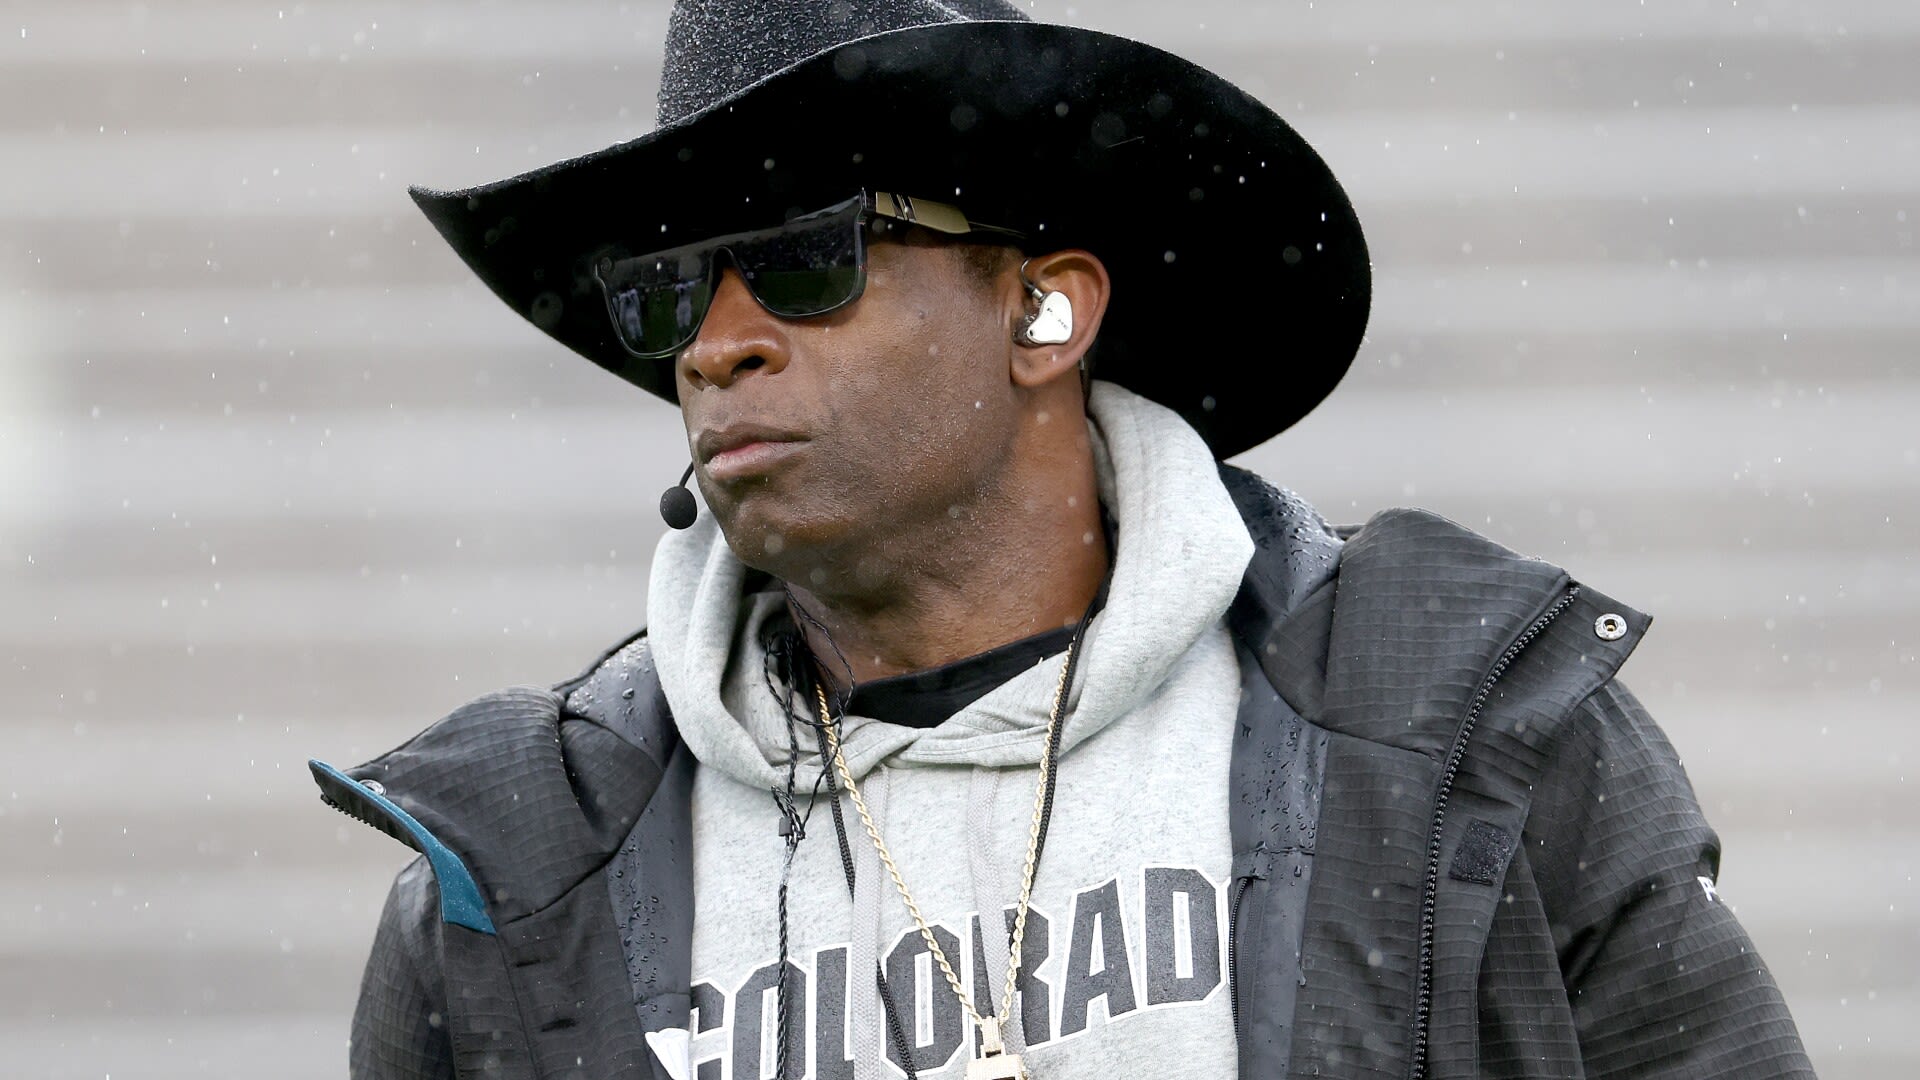 Deion Sanders defends recent social media attack on former player by saying: "I was bored"